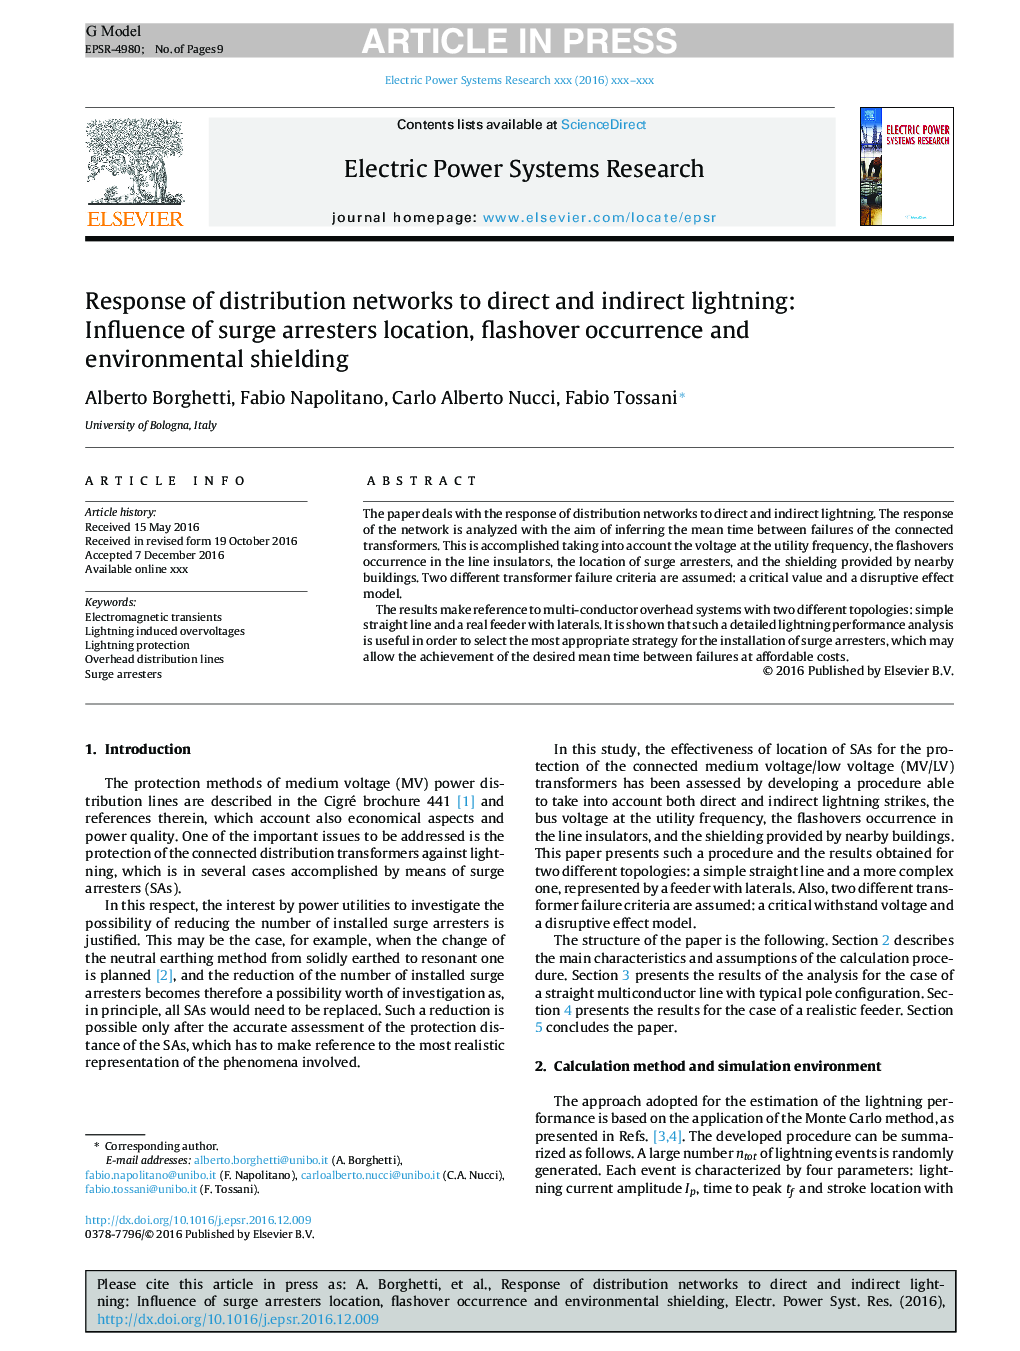 Response of distribution networks to direct and indirect lightning: Influence of surge arresters location, flashover occurrence and environmental shielding